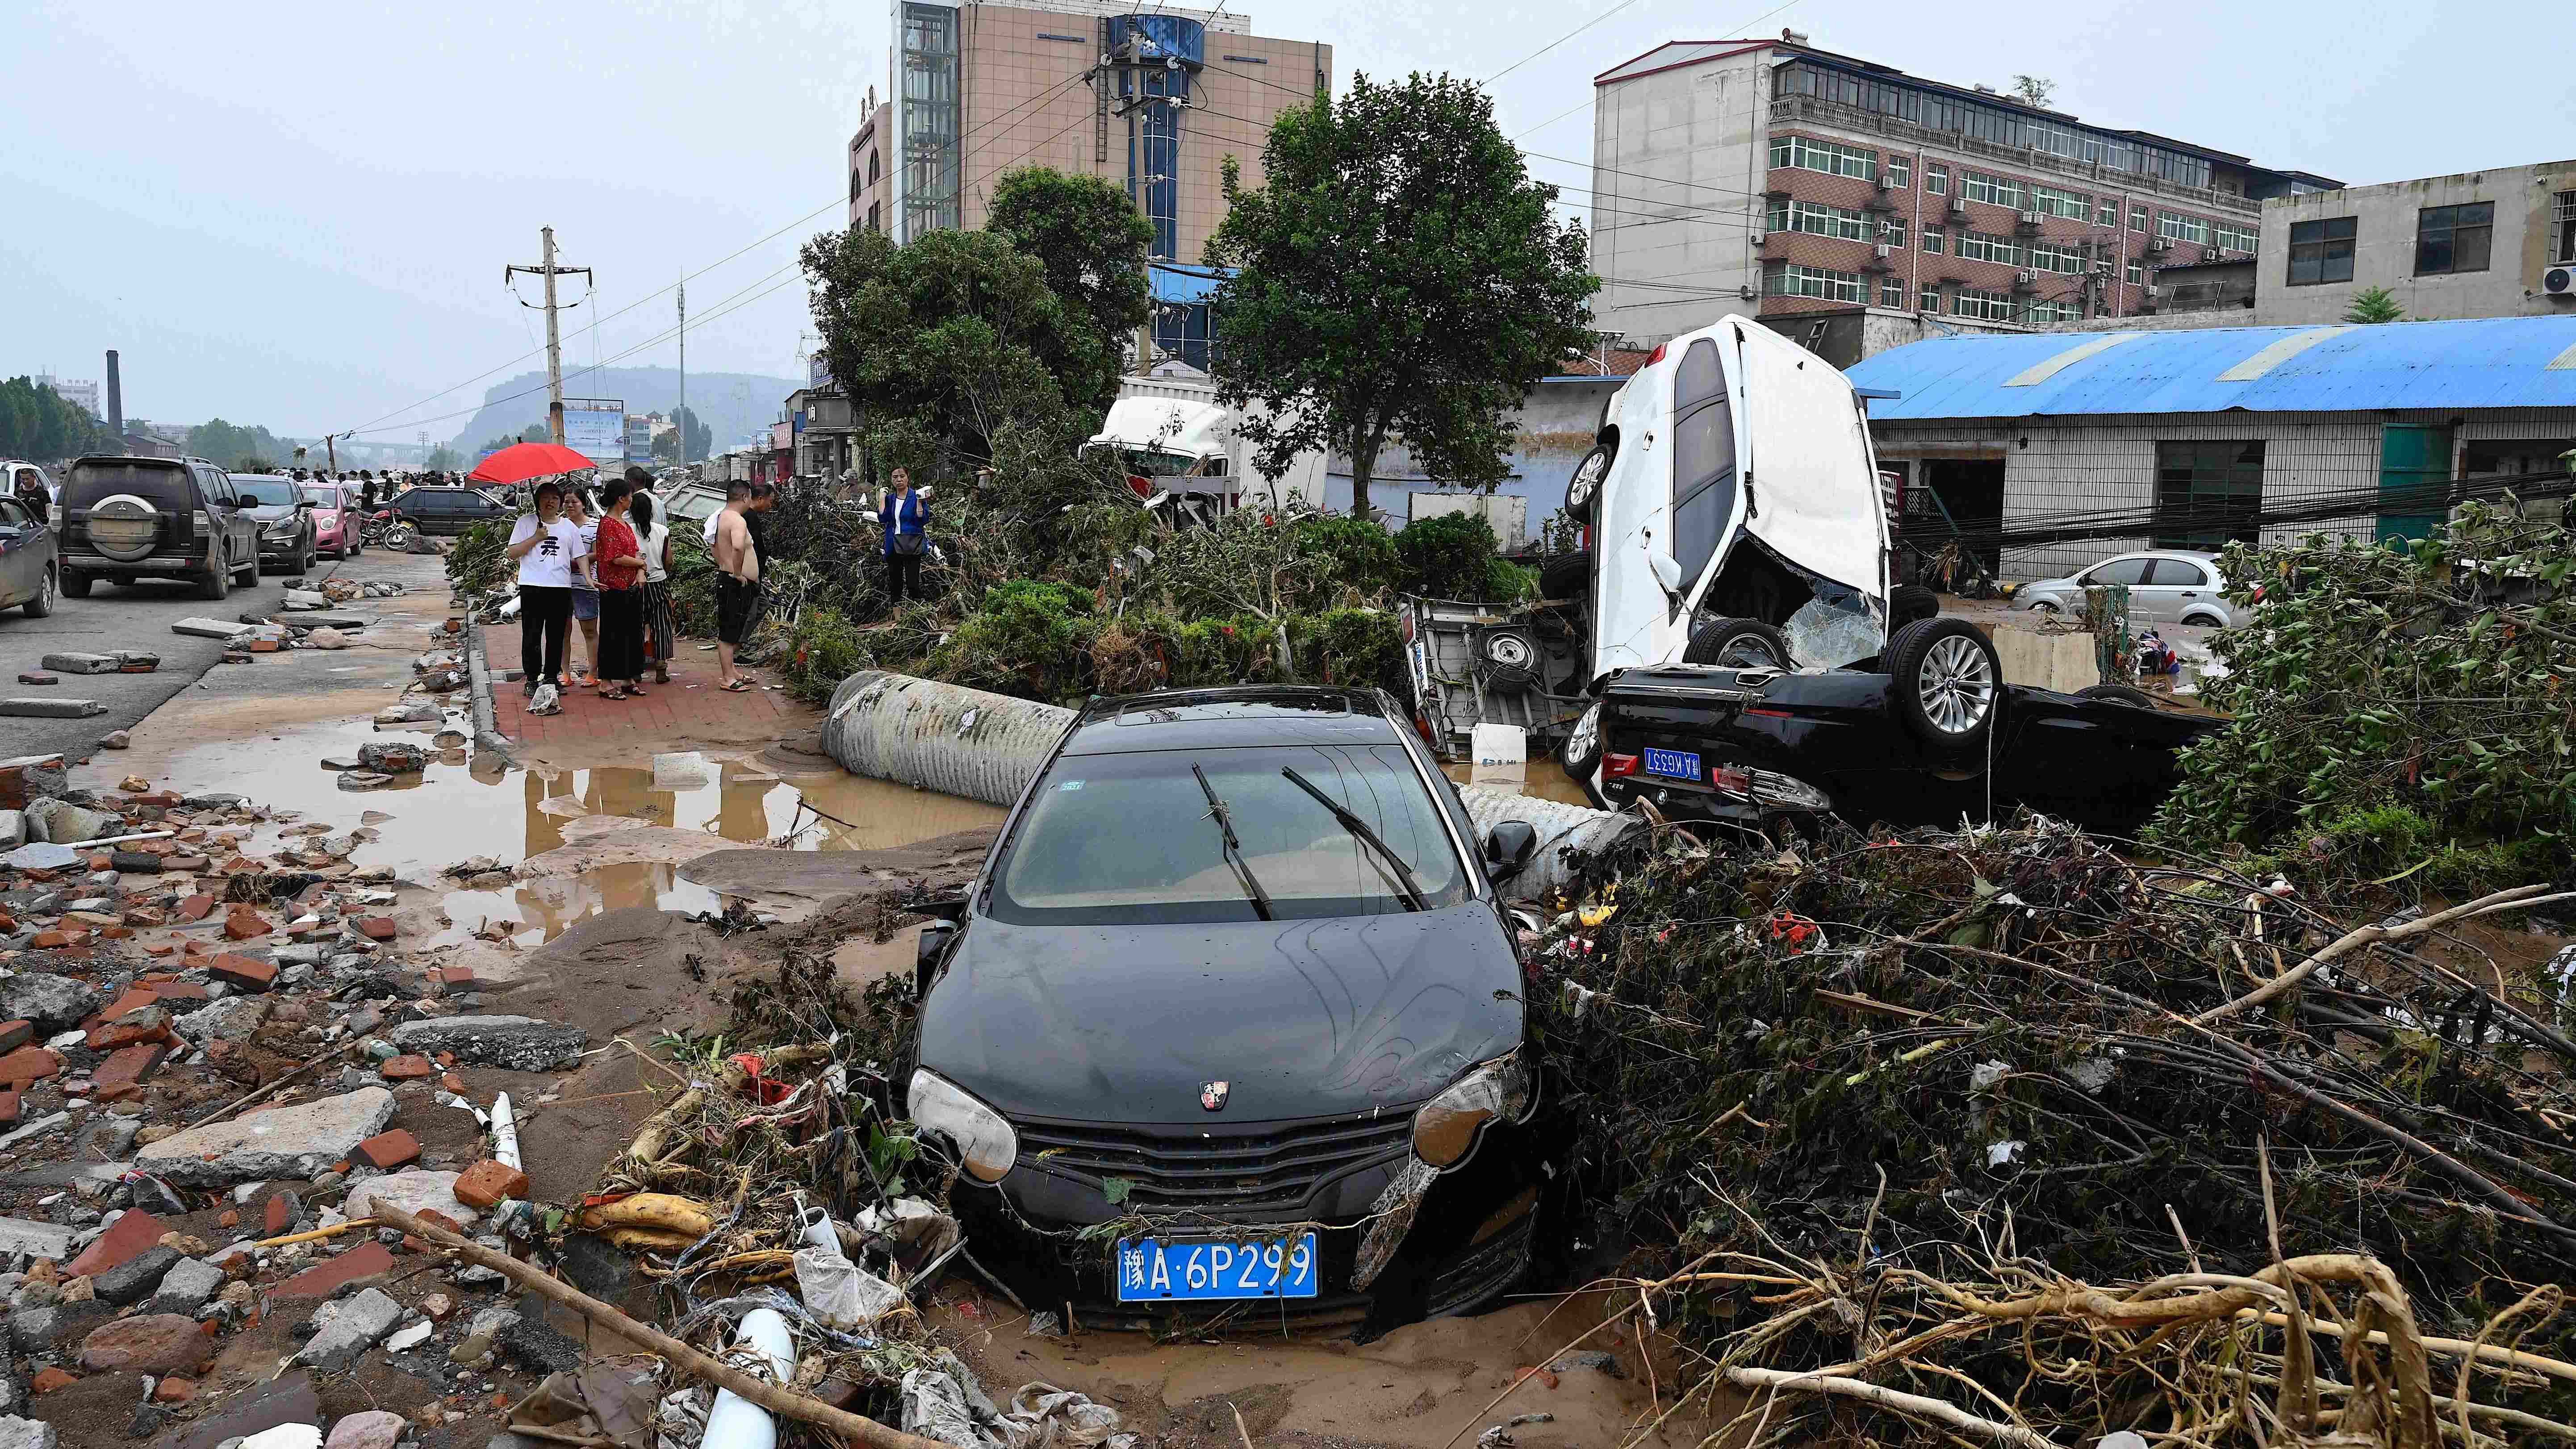 Cars are stuck on a muddy road after severe flooding and landslide in recent days have hit the county-level Gongyi city, near Zhengzhou, in central China’s Henan province on July 22, 2021. Credit: AFP Photo